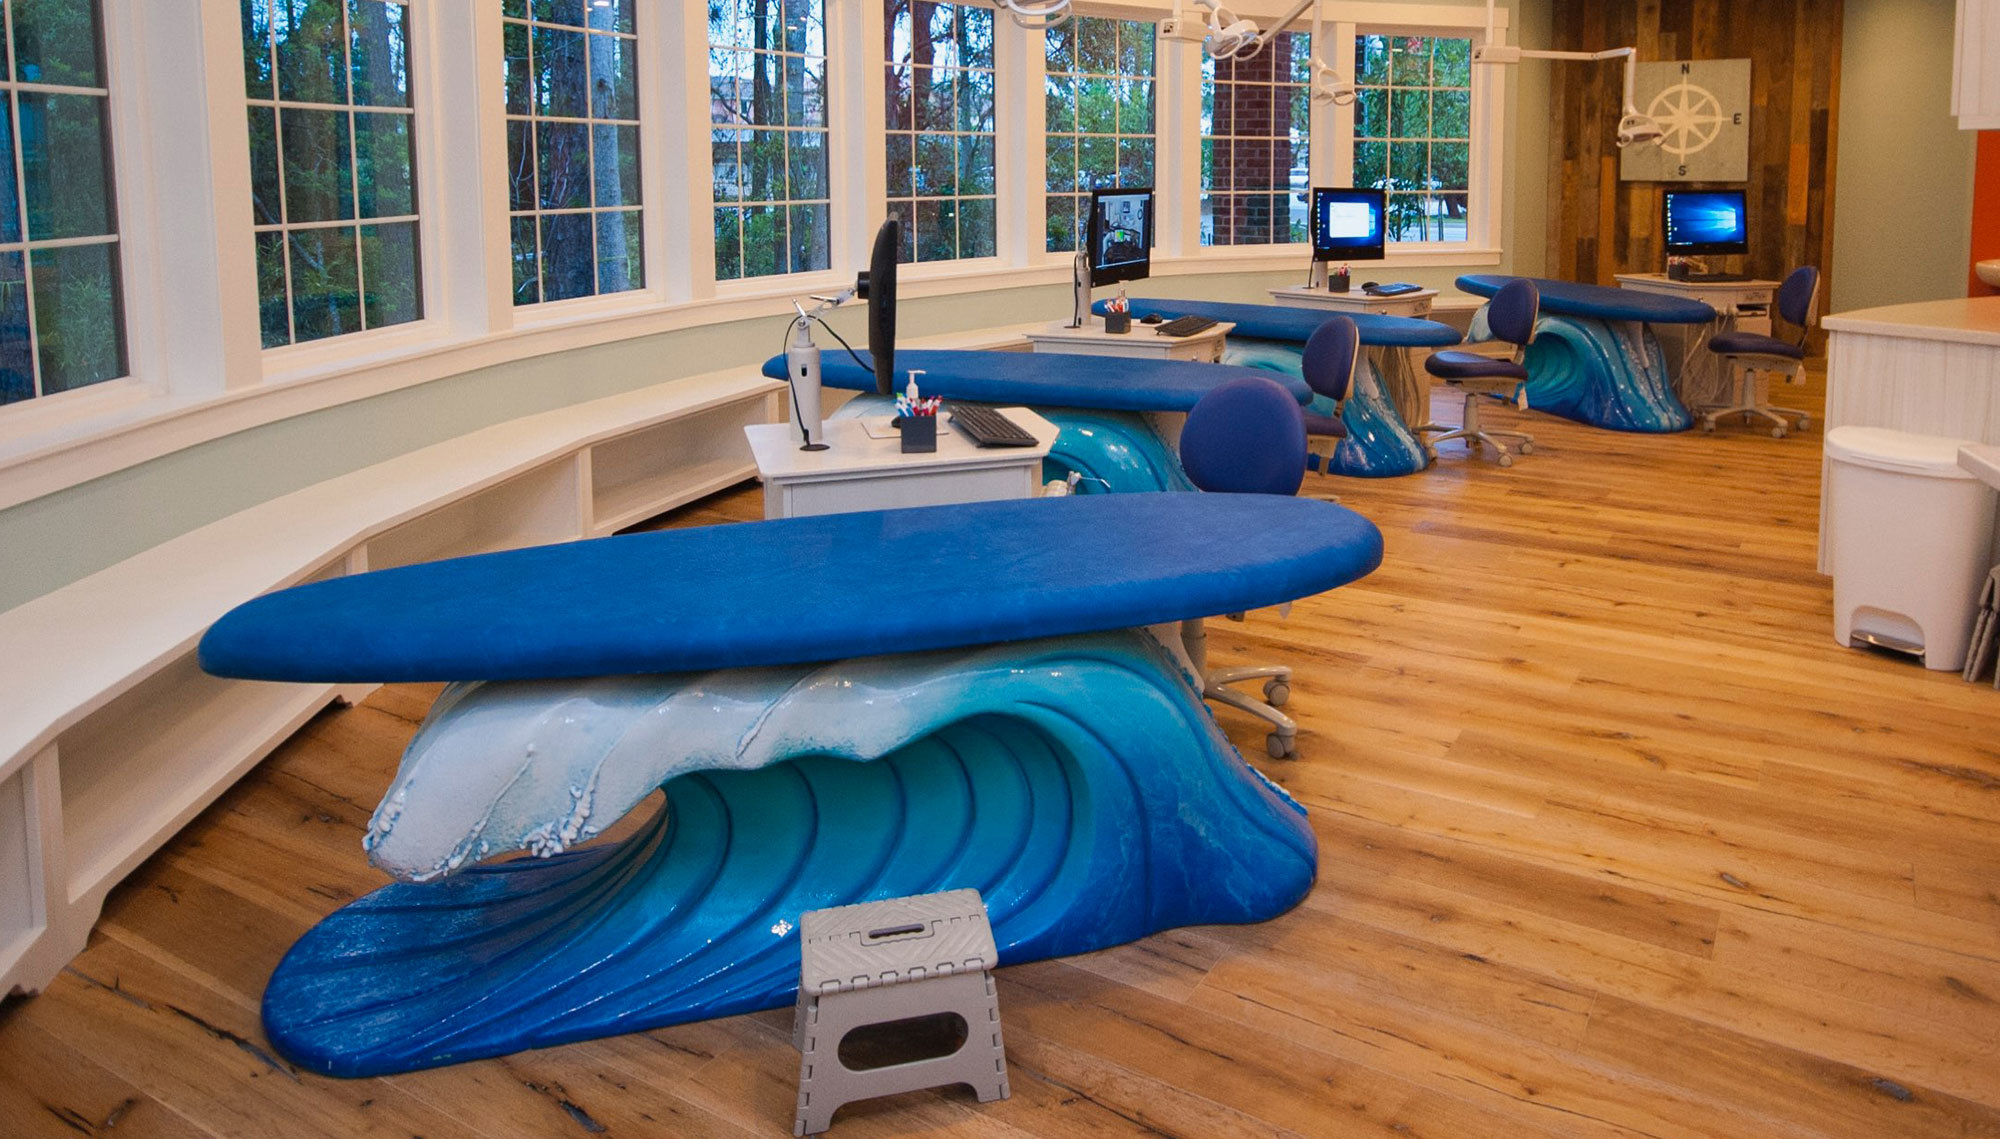 3D Wave and blue Surfboard medical exam tables